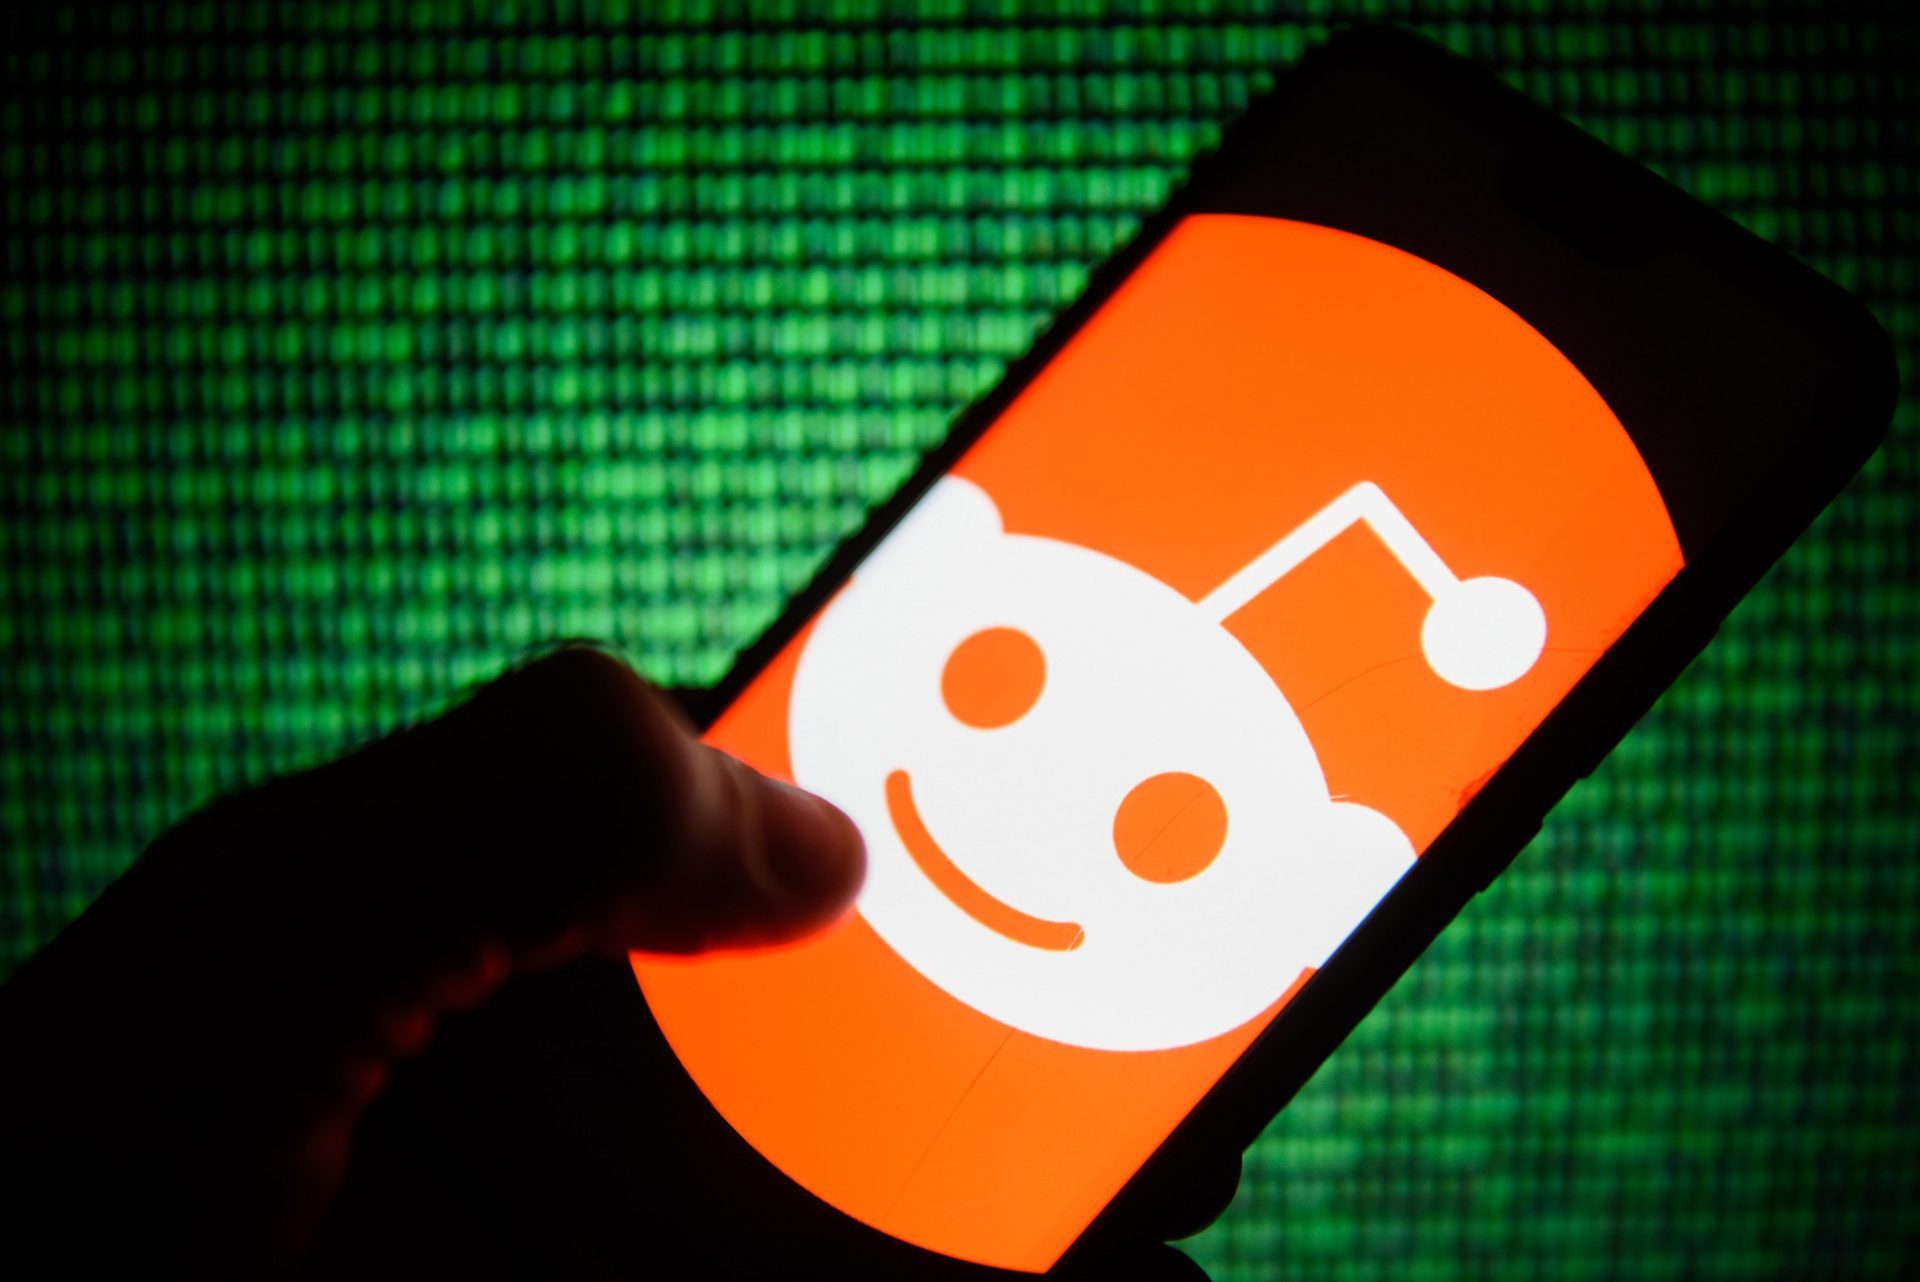 Reddit doubles valuation to $6B amid WallStreetBets, GameStop frenzy